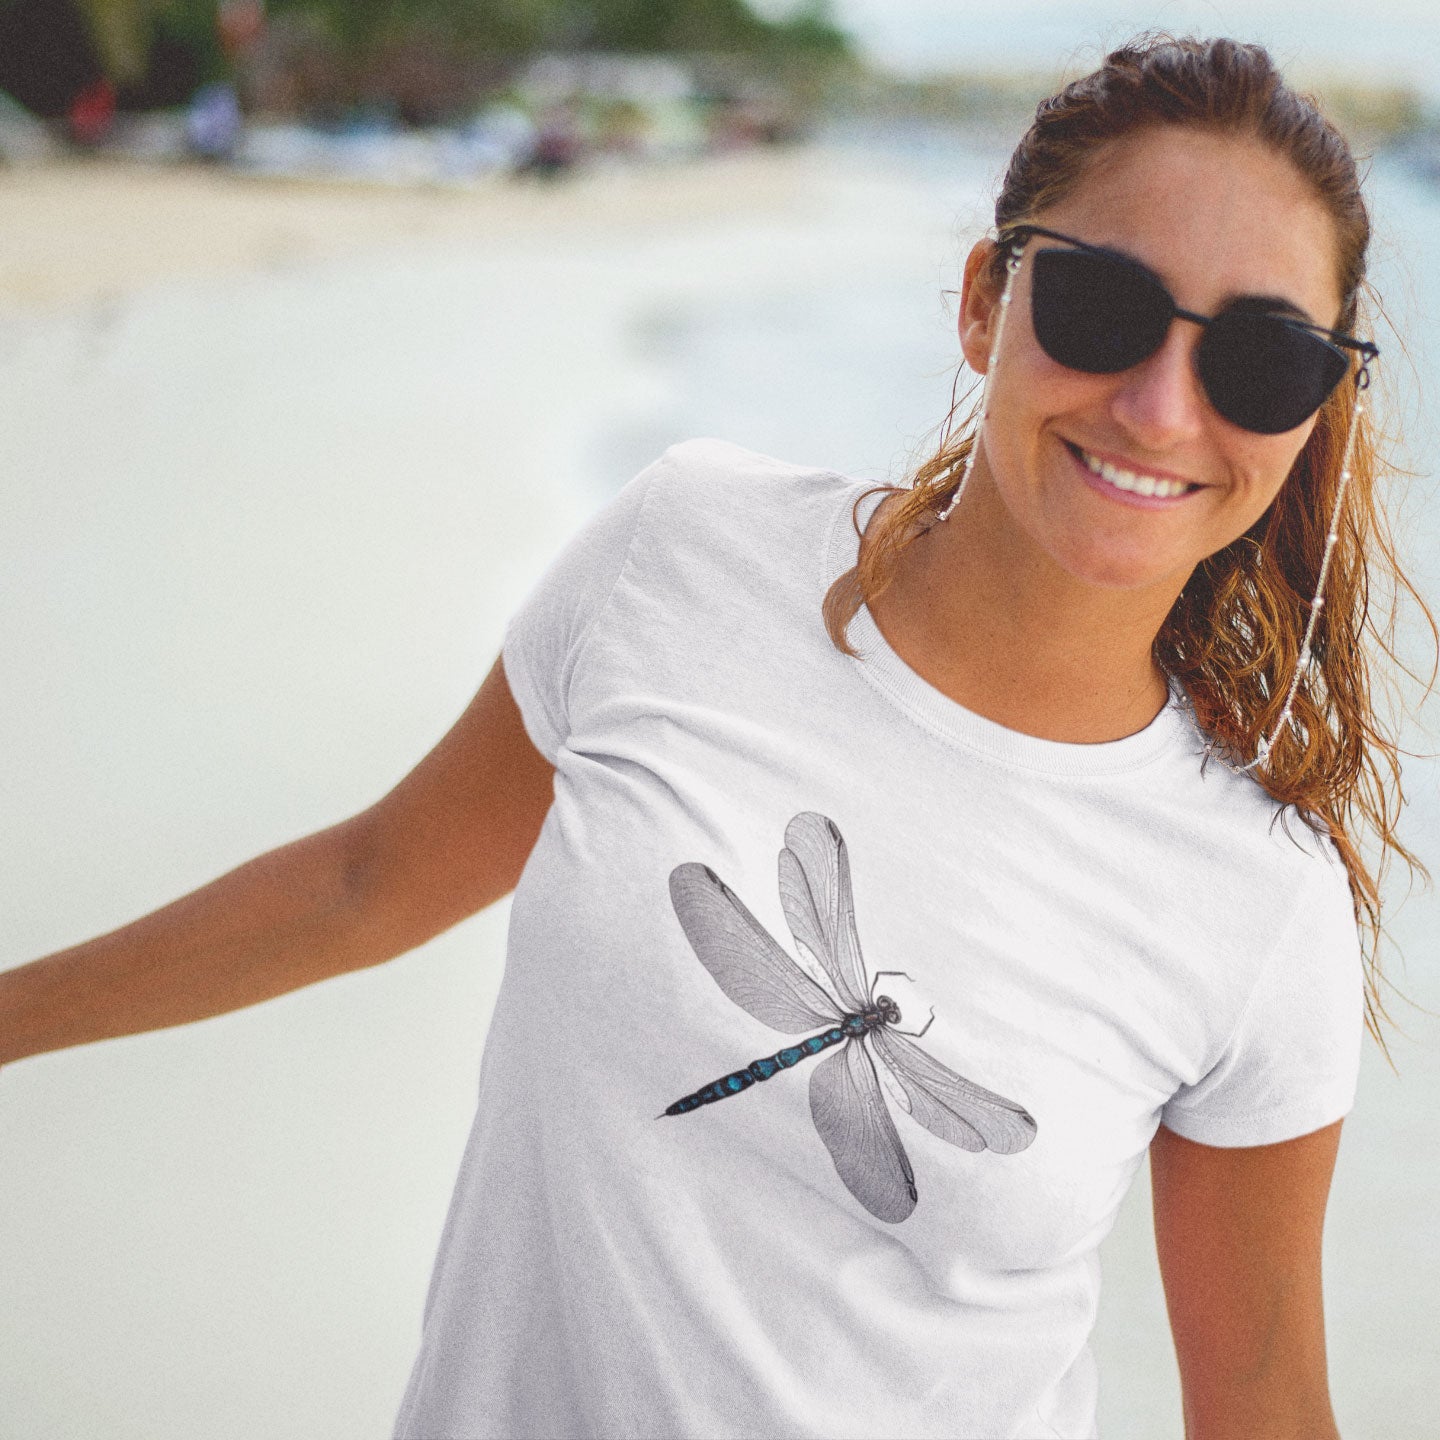 woman on the beach wearing a white t-shirt with a dragonfly print